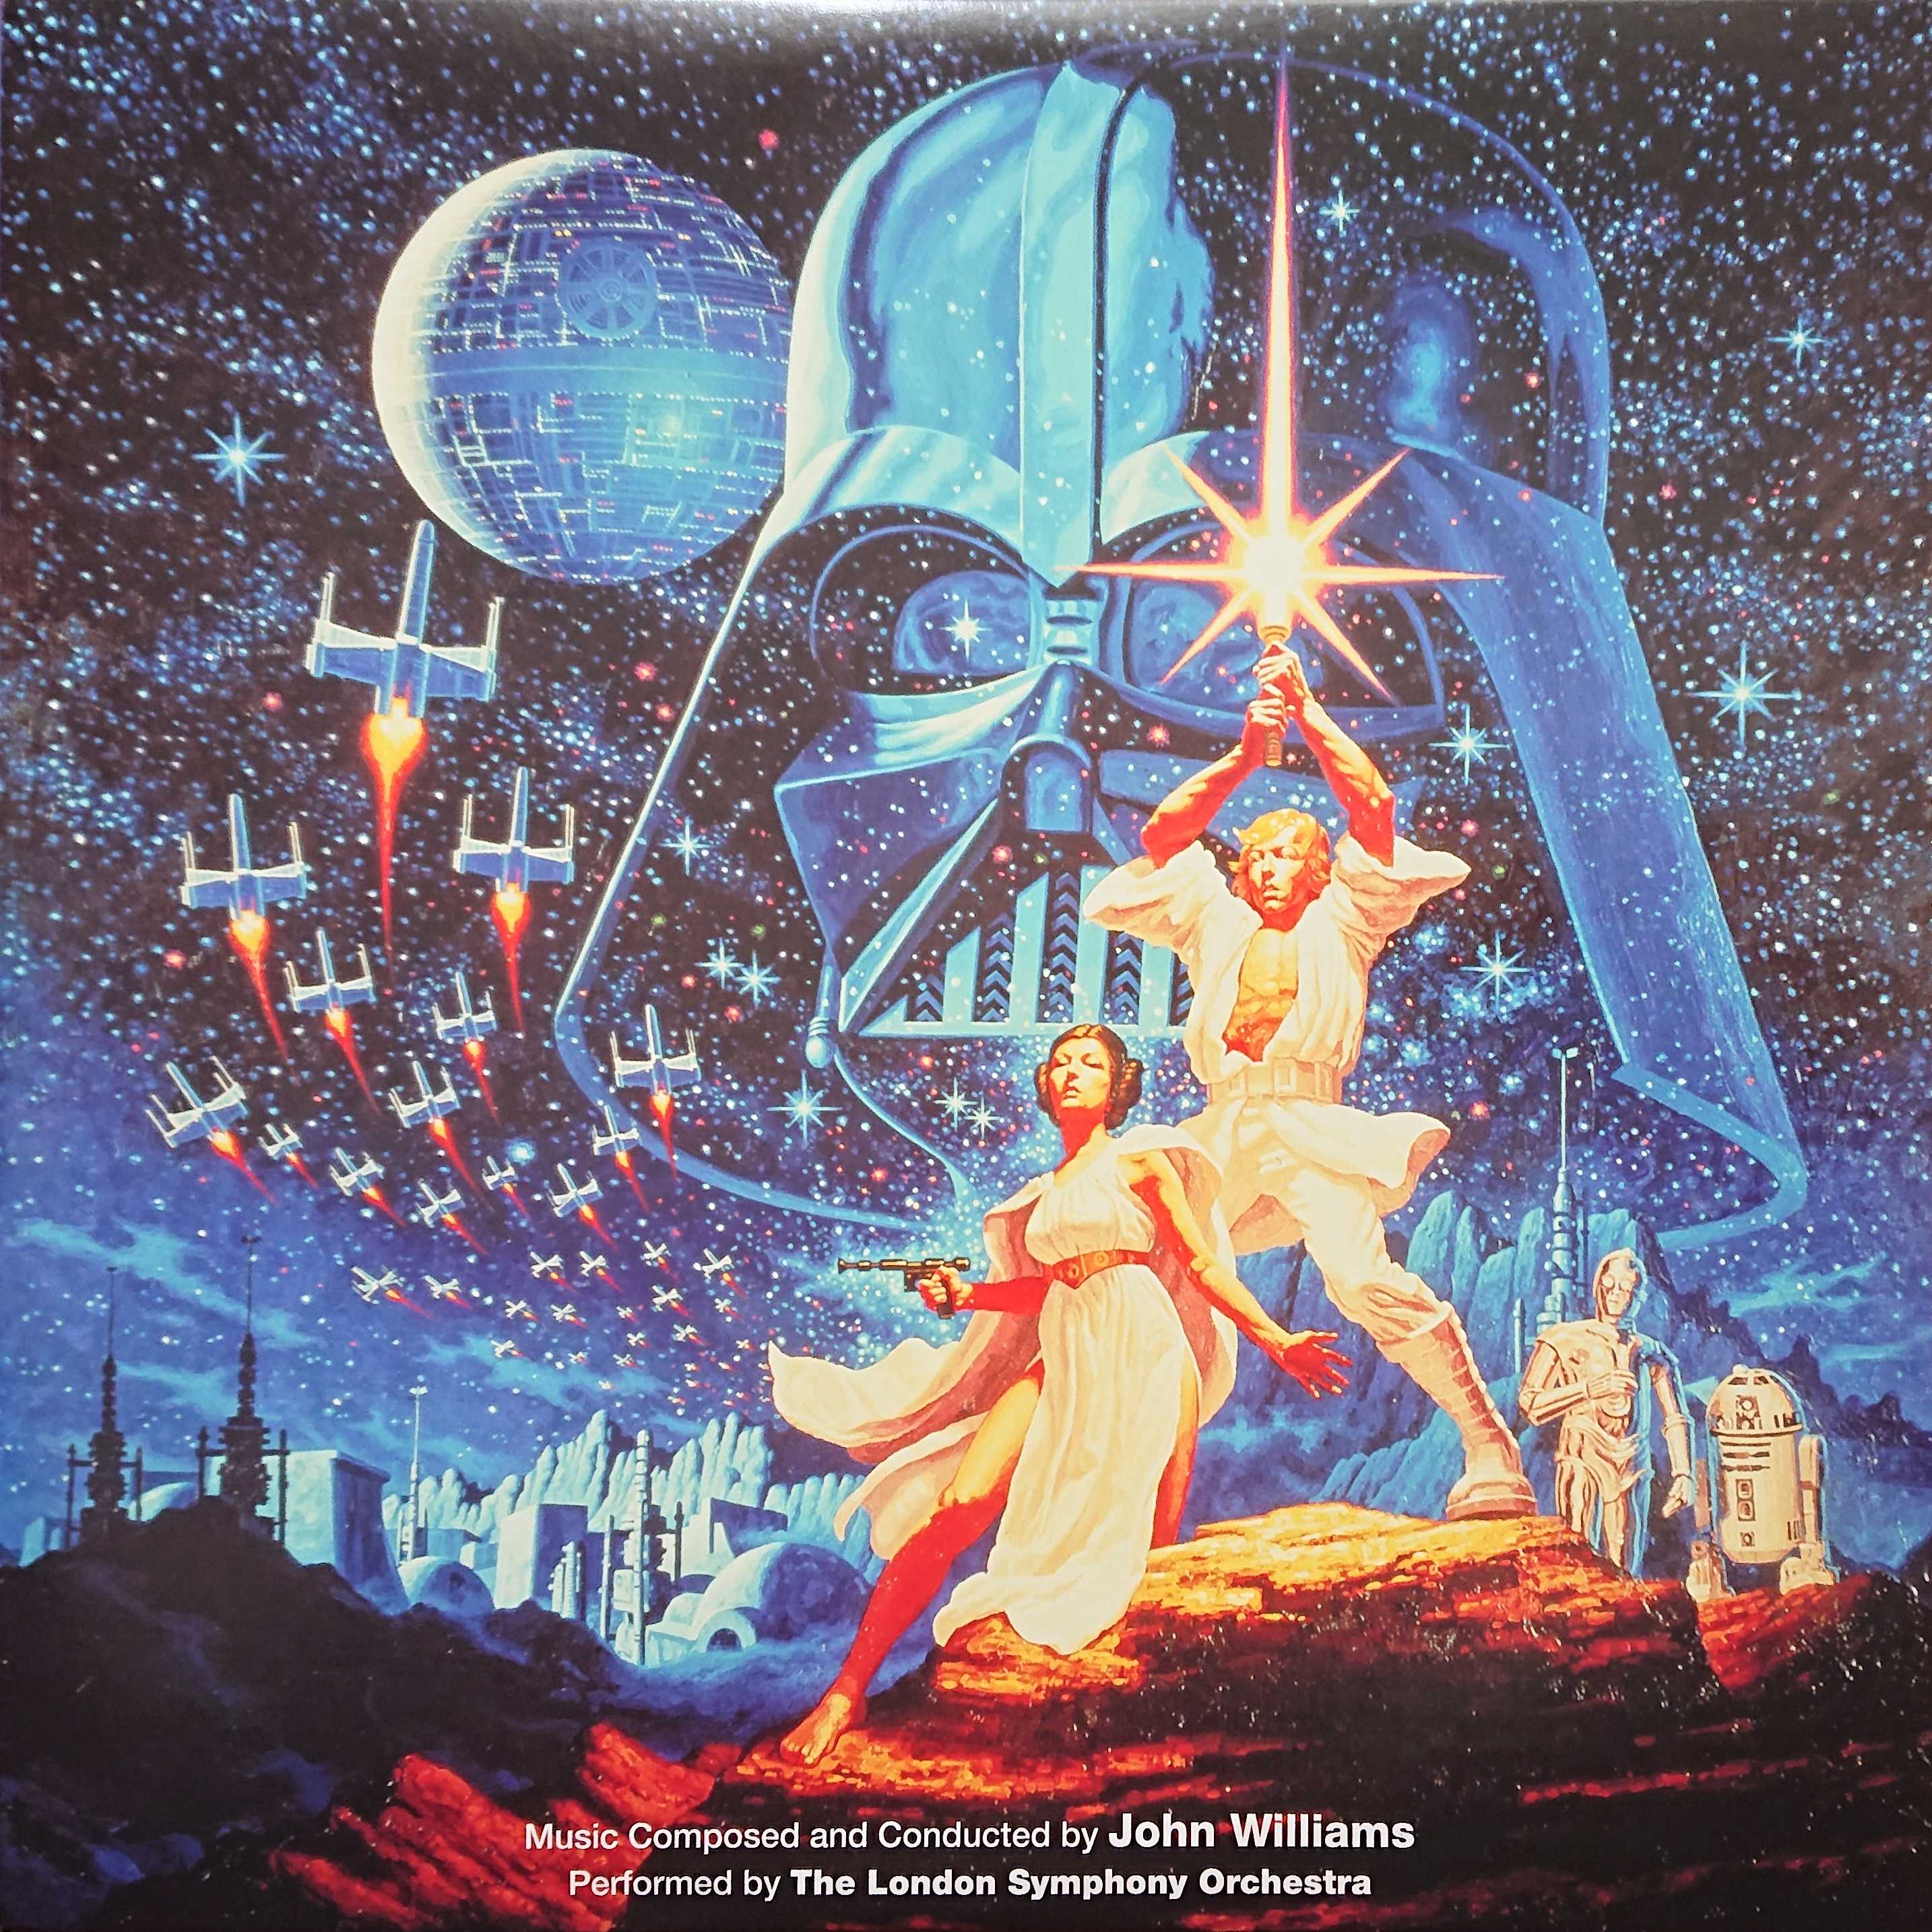 Picture of Star Wars: A new hope by artist John Williams from ITV, Channel 4 and Channel 5 10inches library